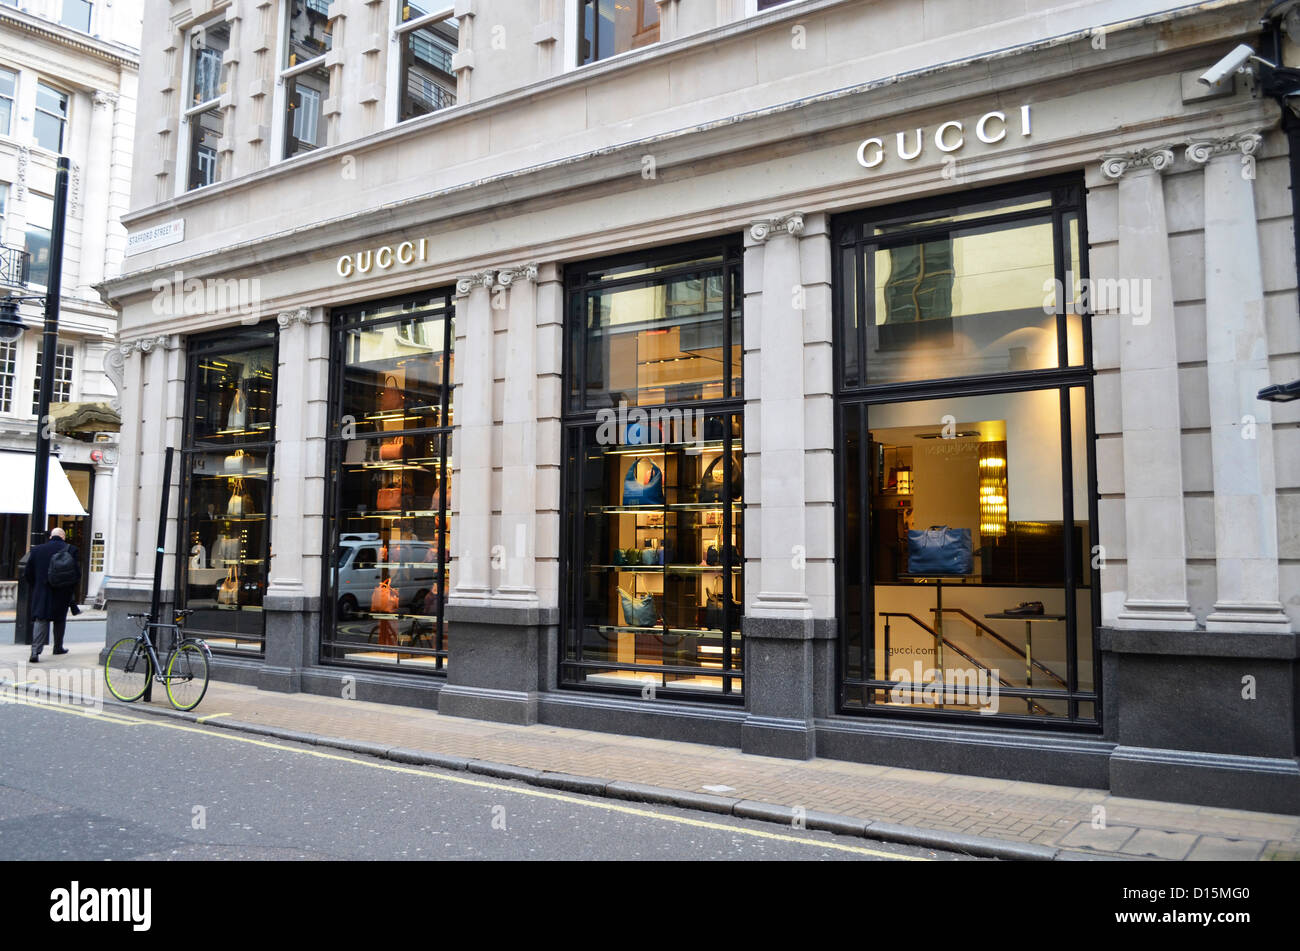 gucci stores in england